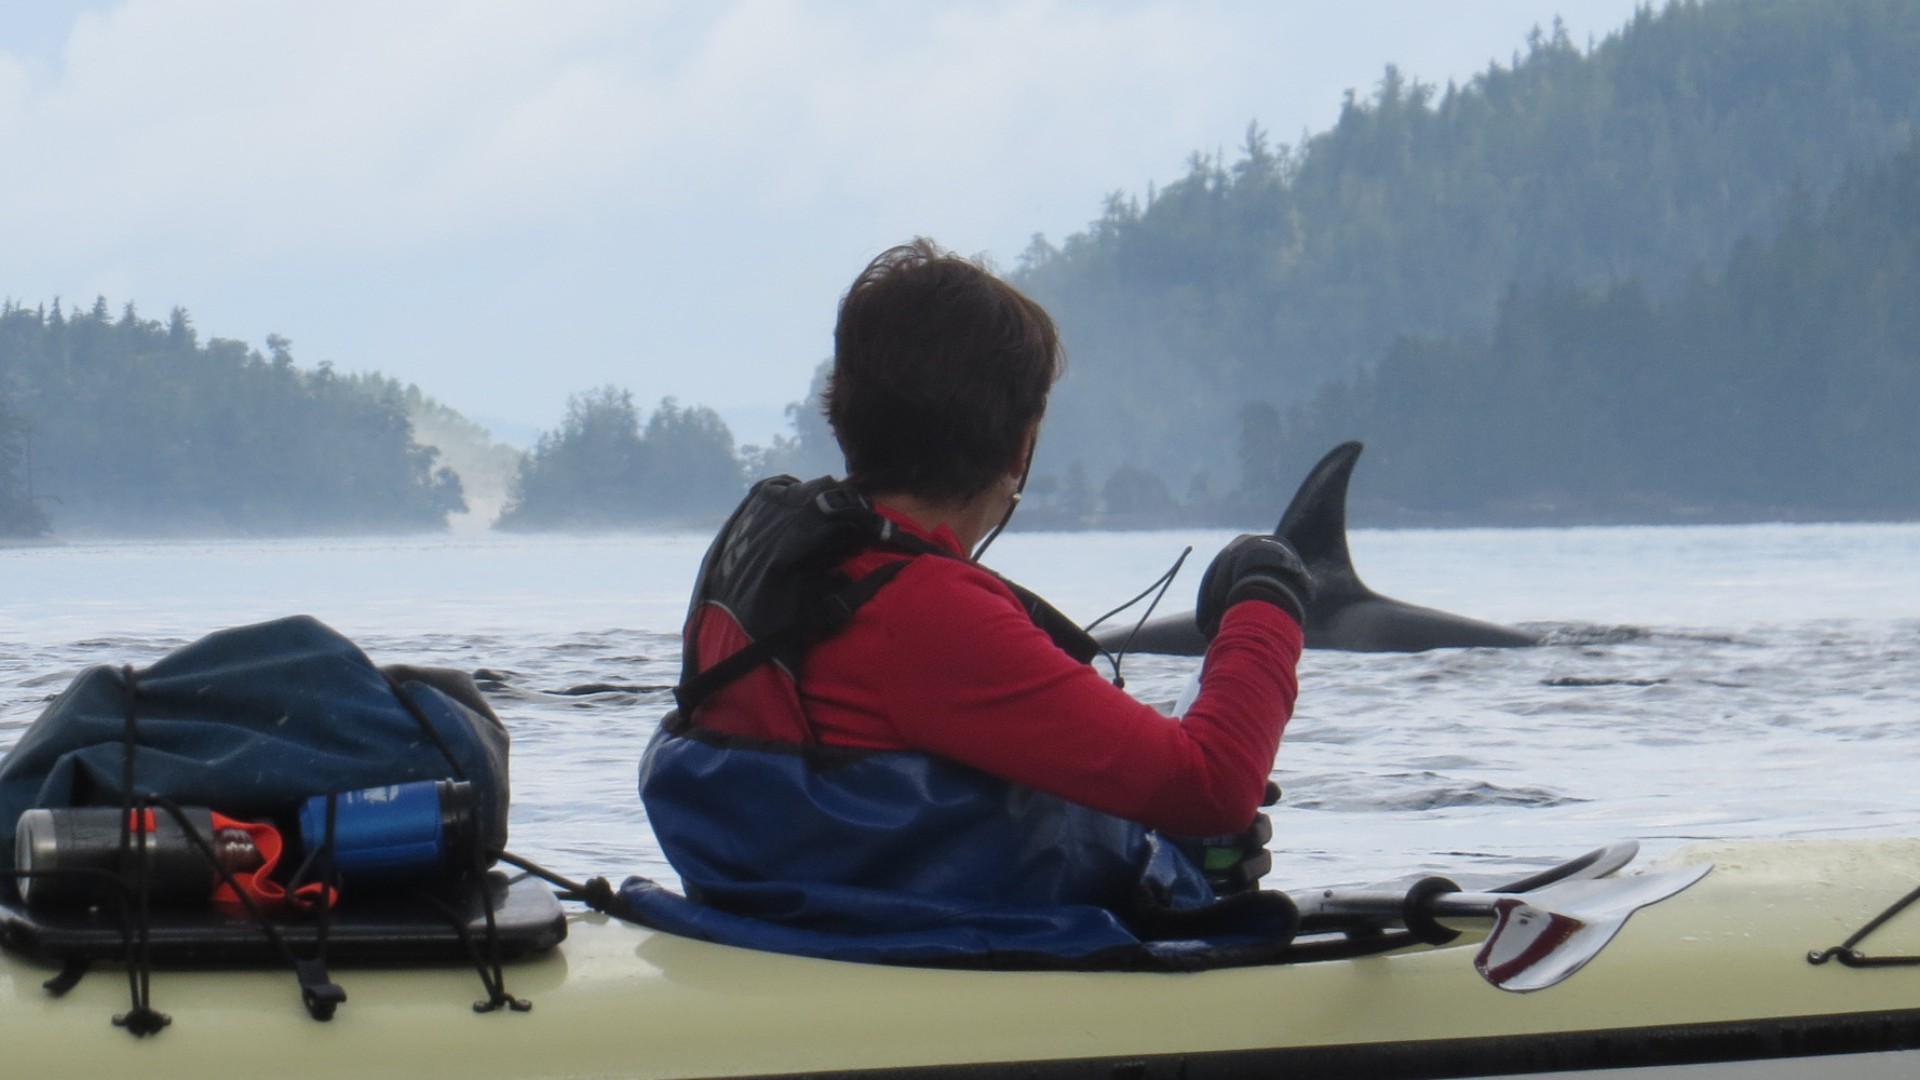 Sea kayaker looking to her left where an orca whale is breaking the surface of the water on a cloudy day in Canada